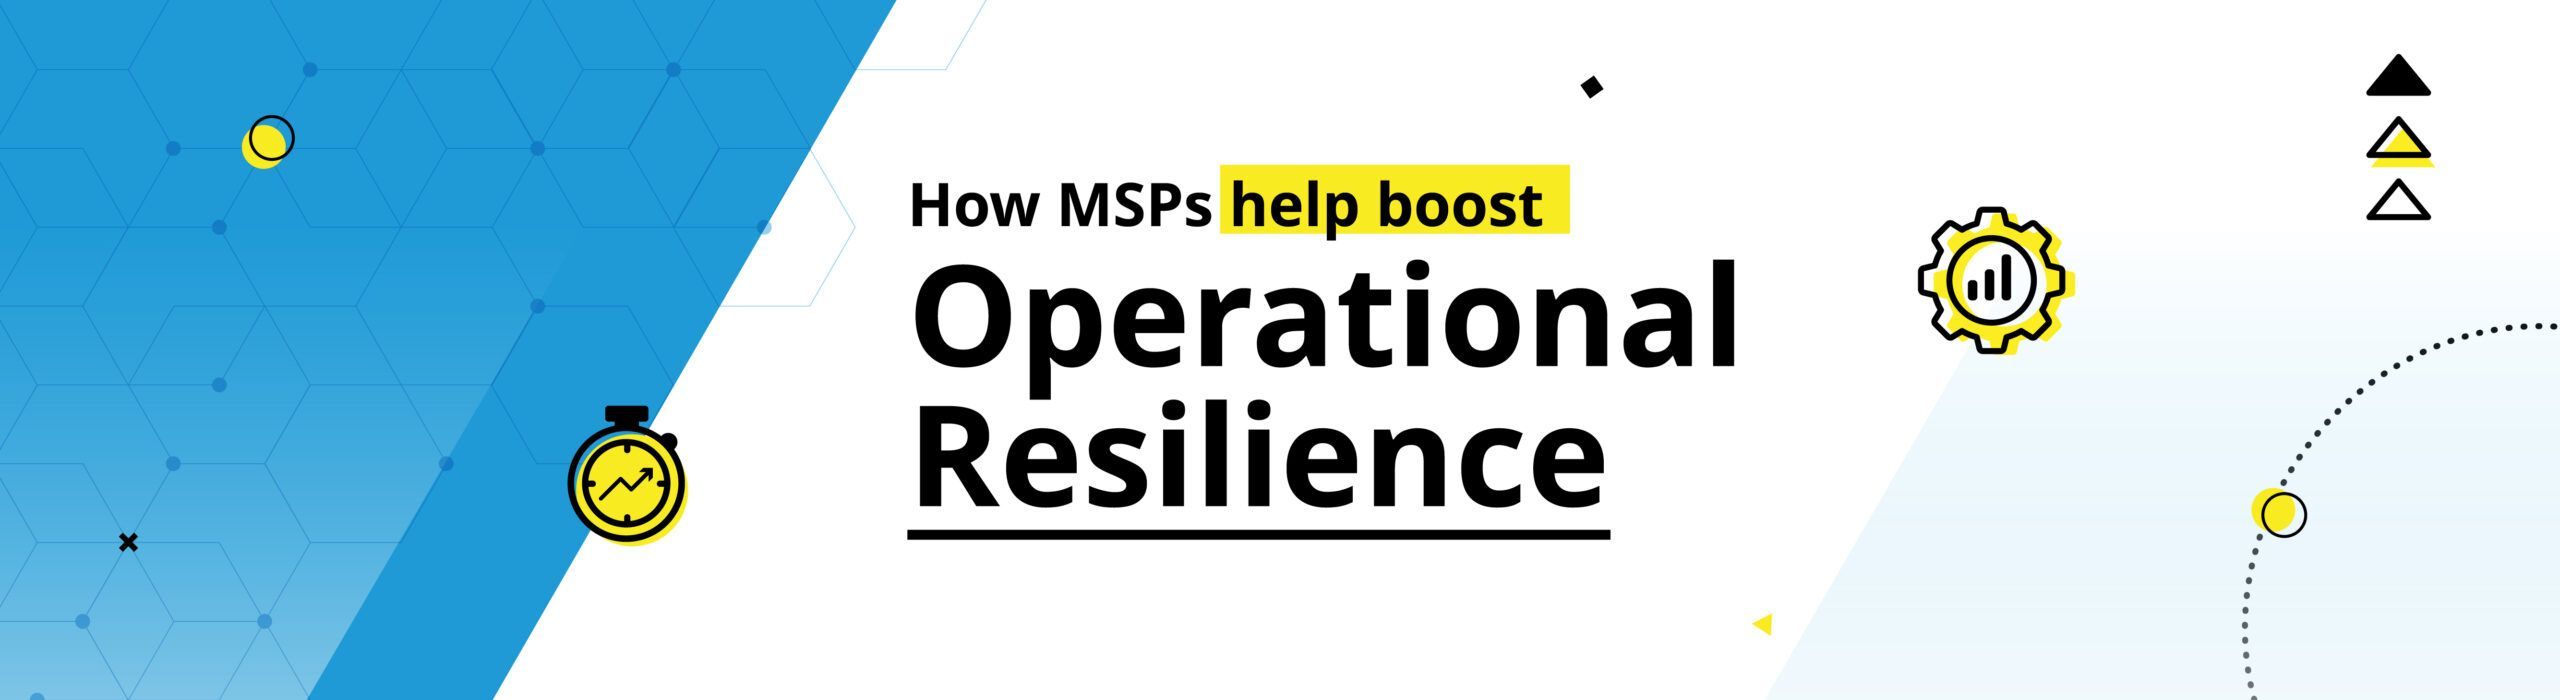 how MSPs help boost operational resilience